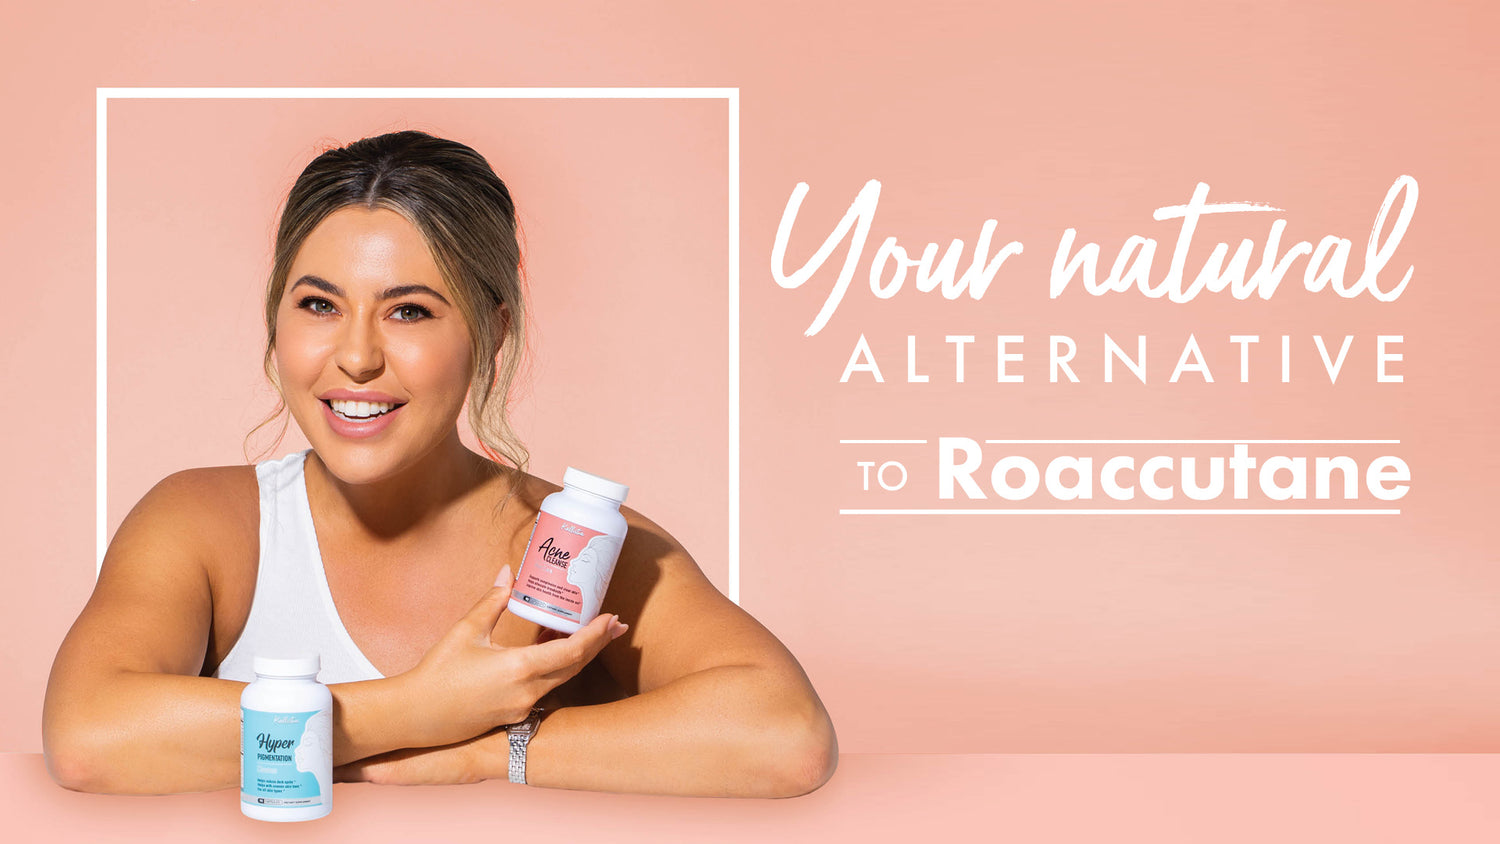 Your natural alternative to Roaccutane